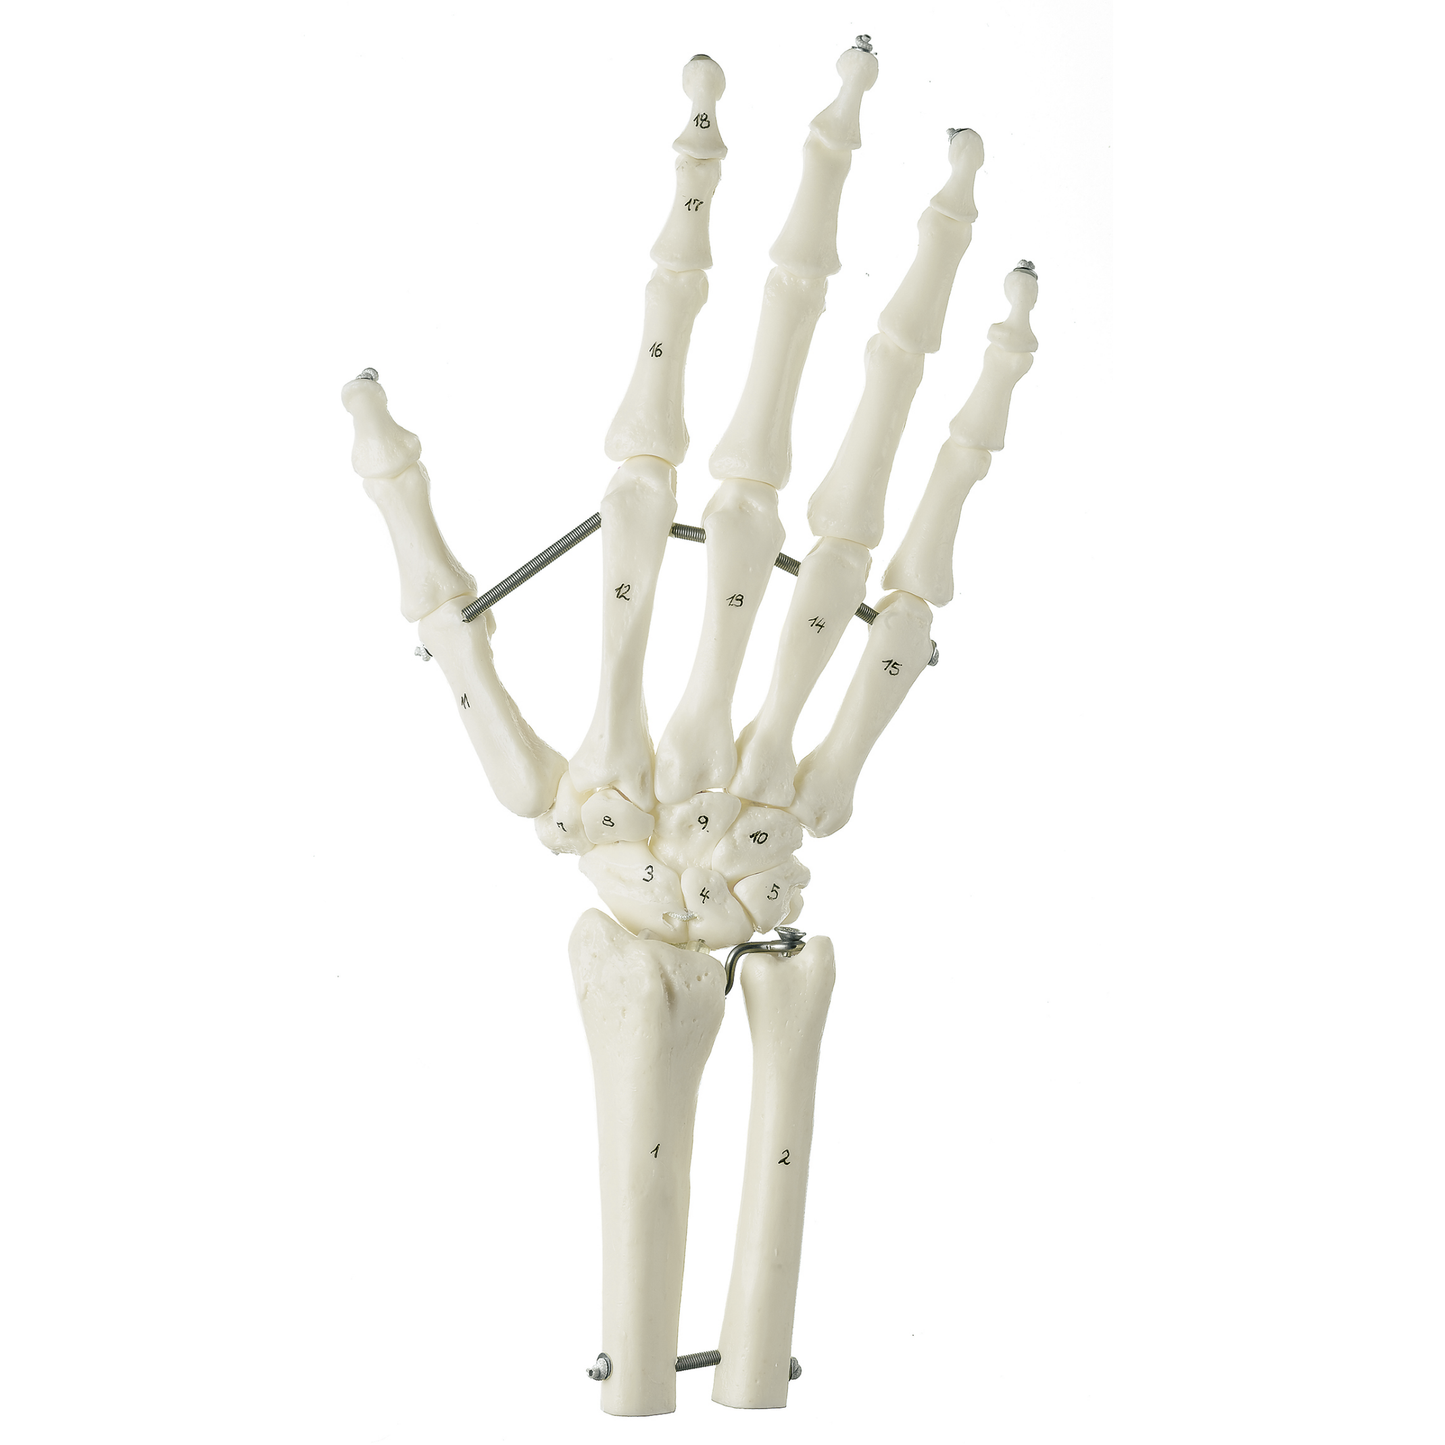 SOMSO skeleton model of hand with part of the forearm bones mounted on elastics